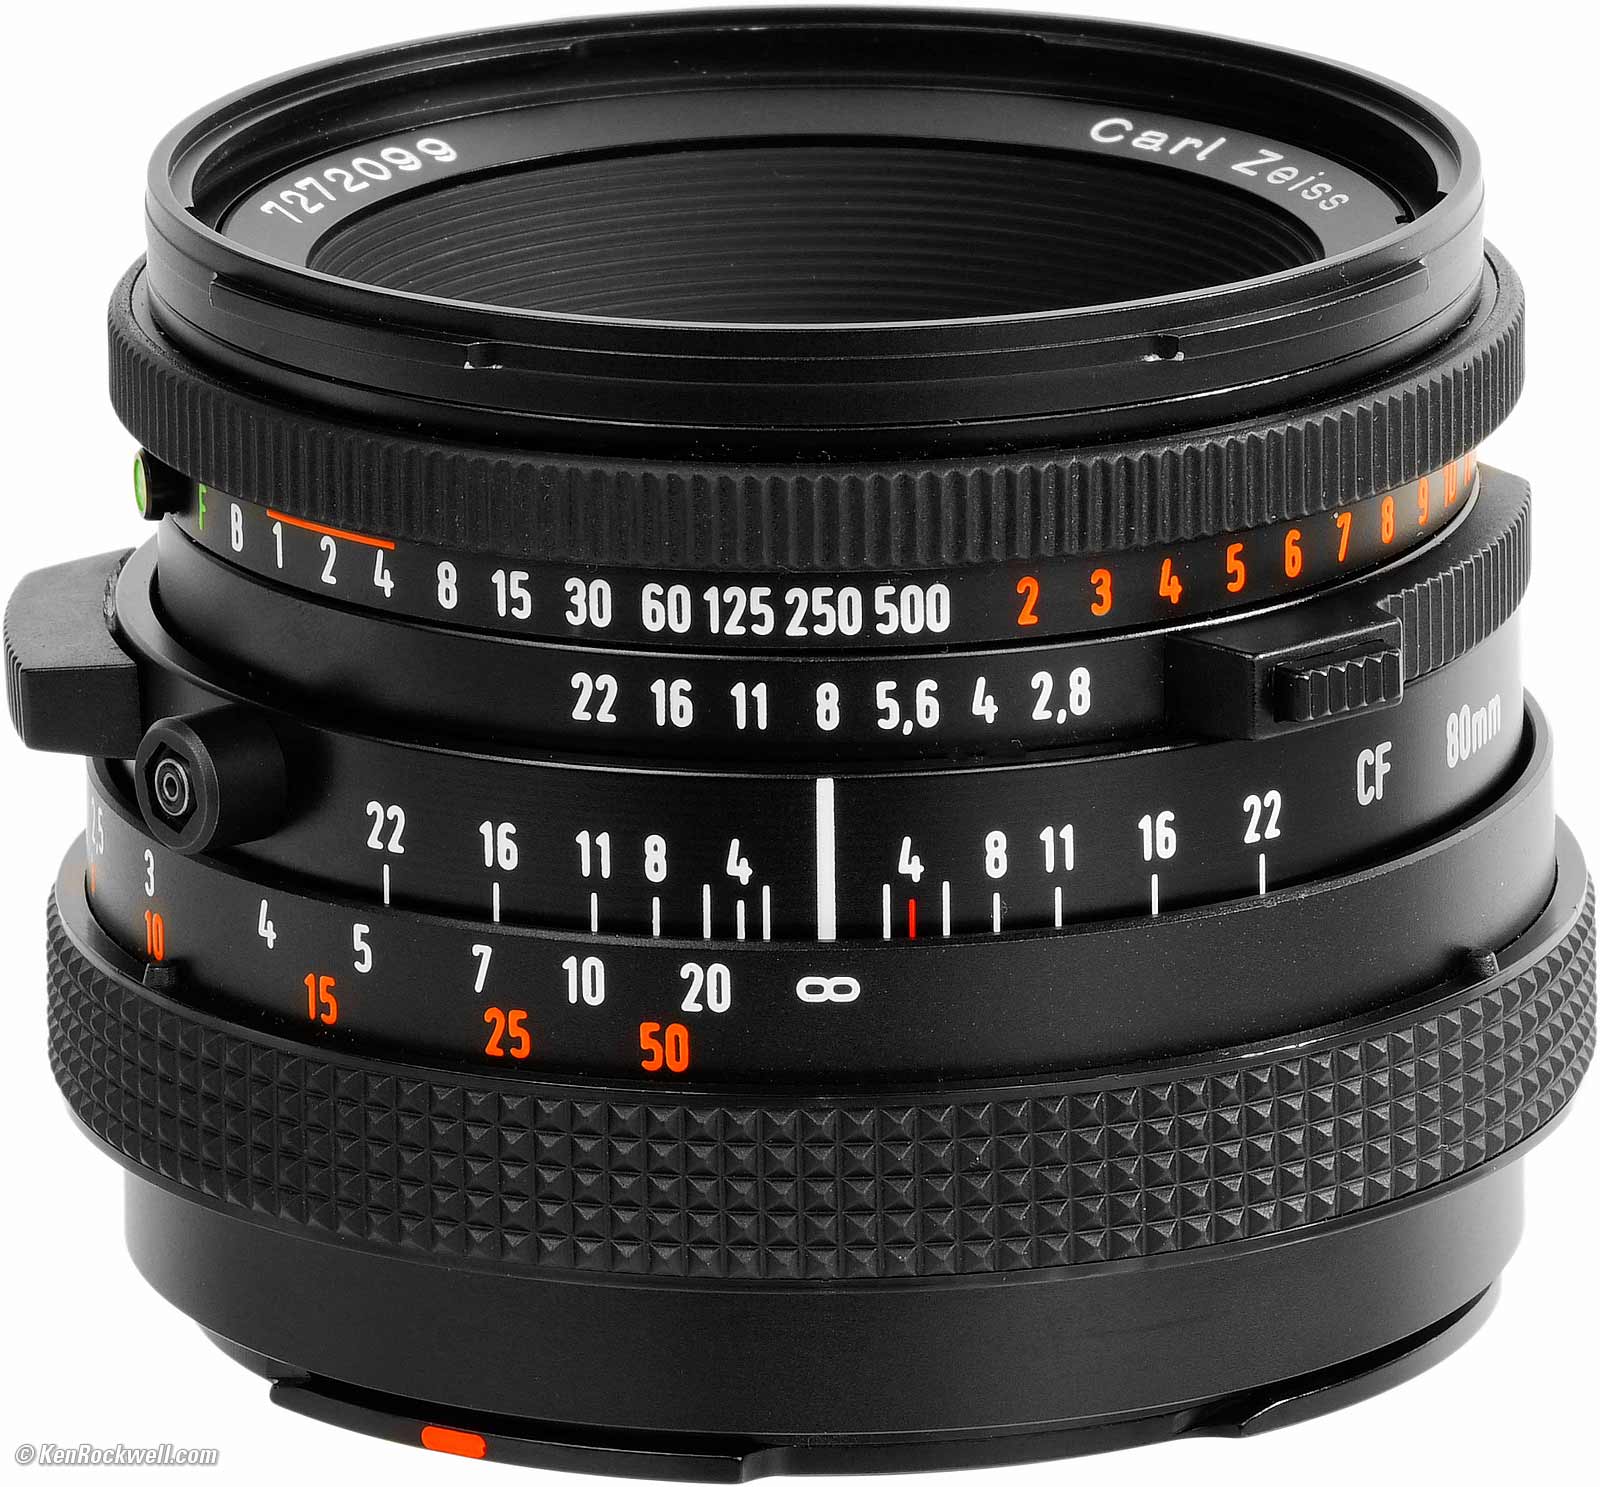 Hasselblad Zeiss Planar 80mm f/2.8 CF Review